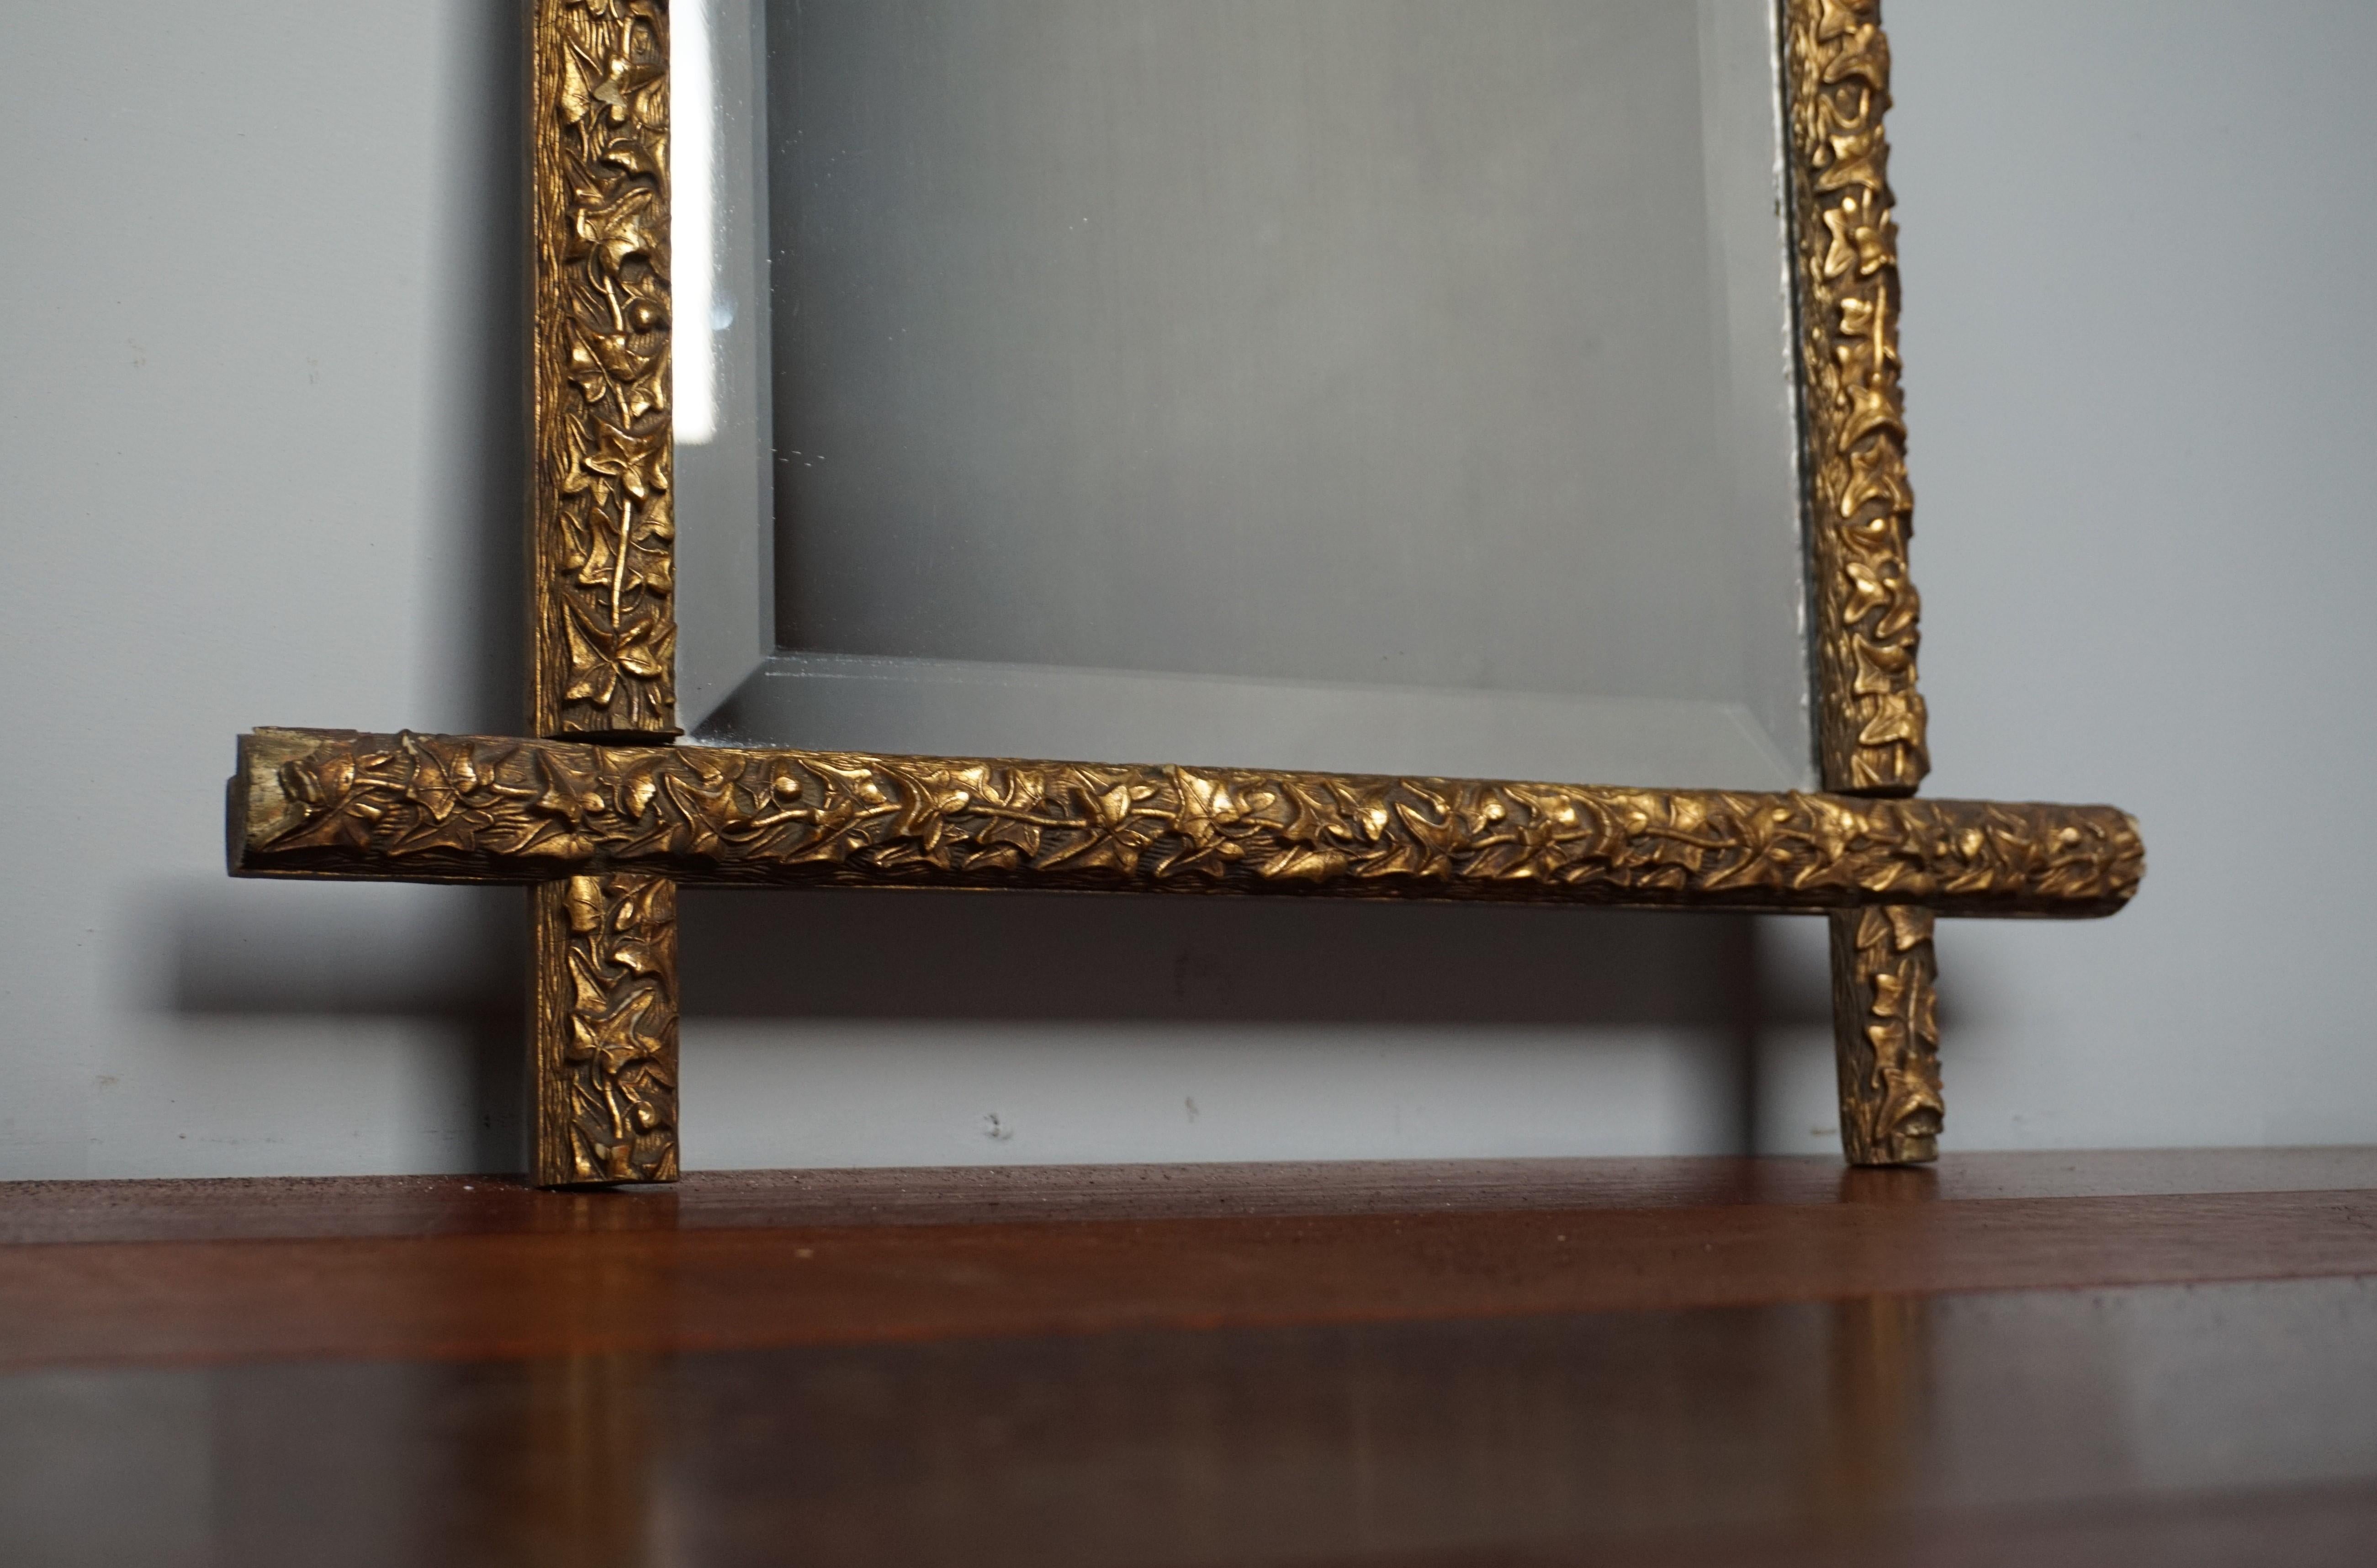 Antique Handcrafted Gothic Revival Gilt Leafs on Wooden Frame 1880s Cross Mirror For Sale 3